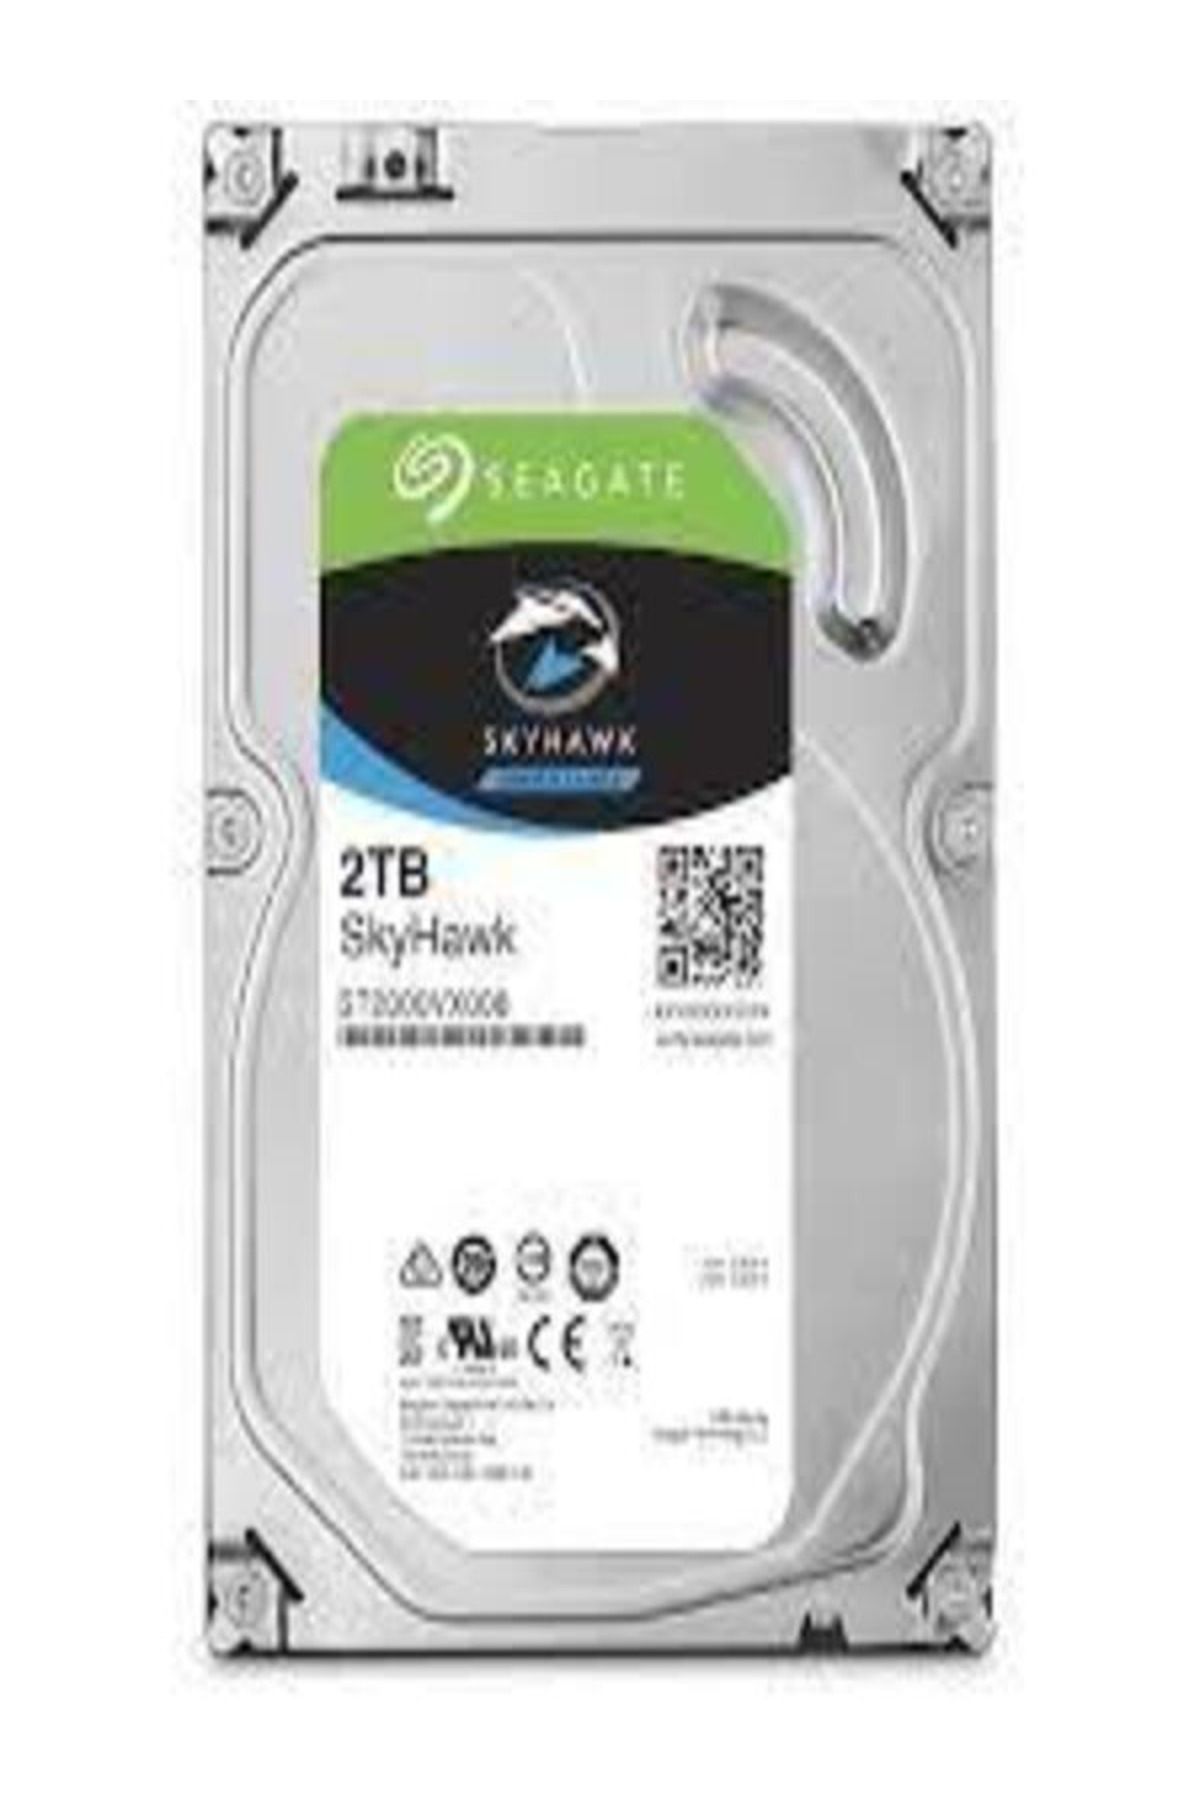 Hilook 2tb Seagate Hdd